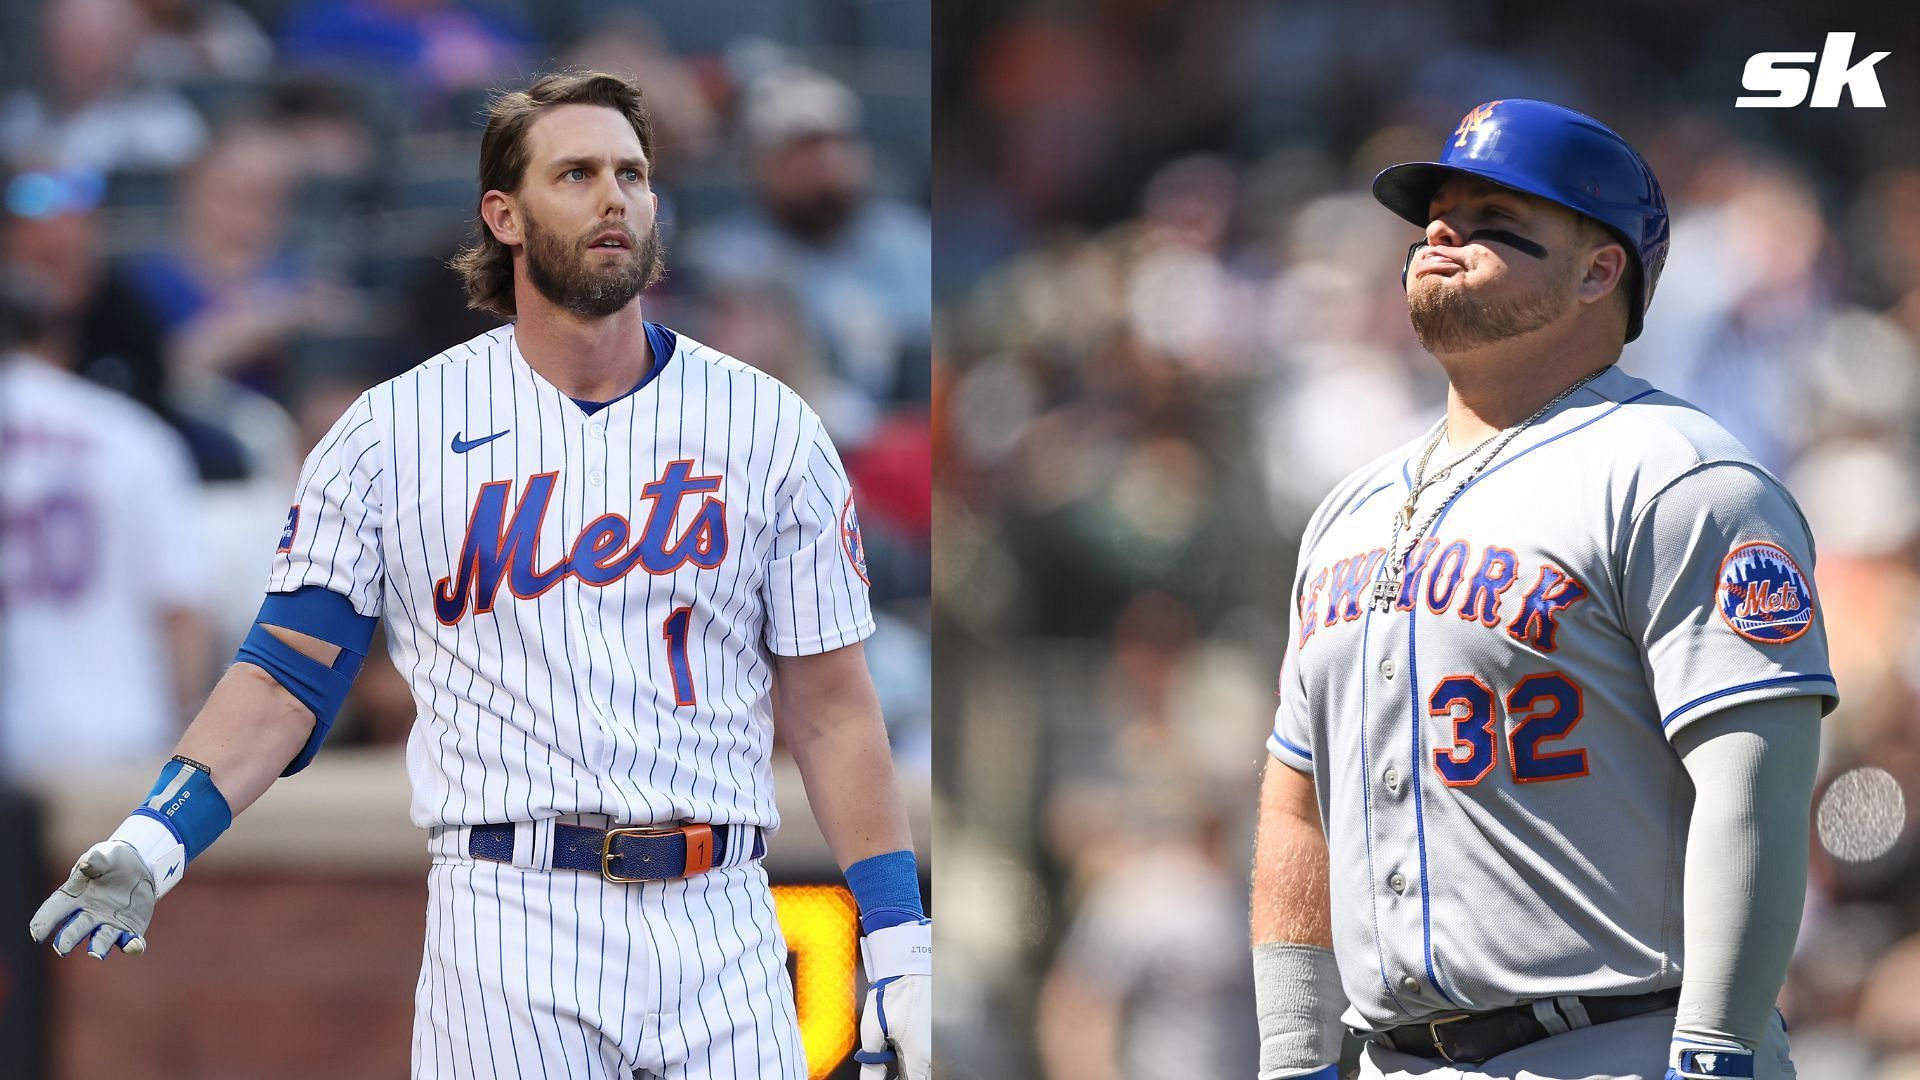 Mets approach 2023 season hoping to achieve NL East crown